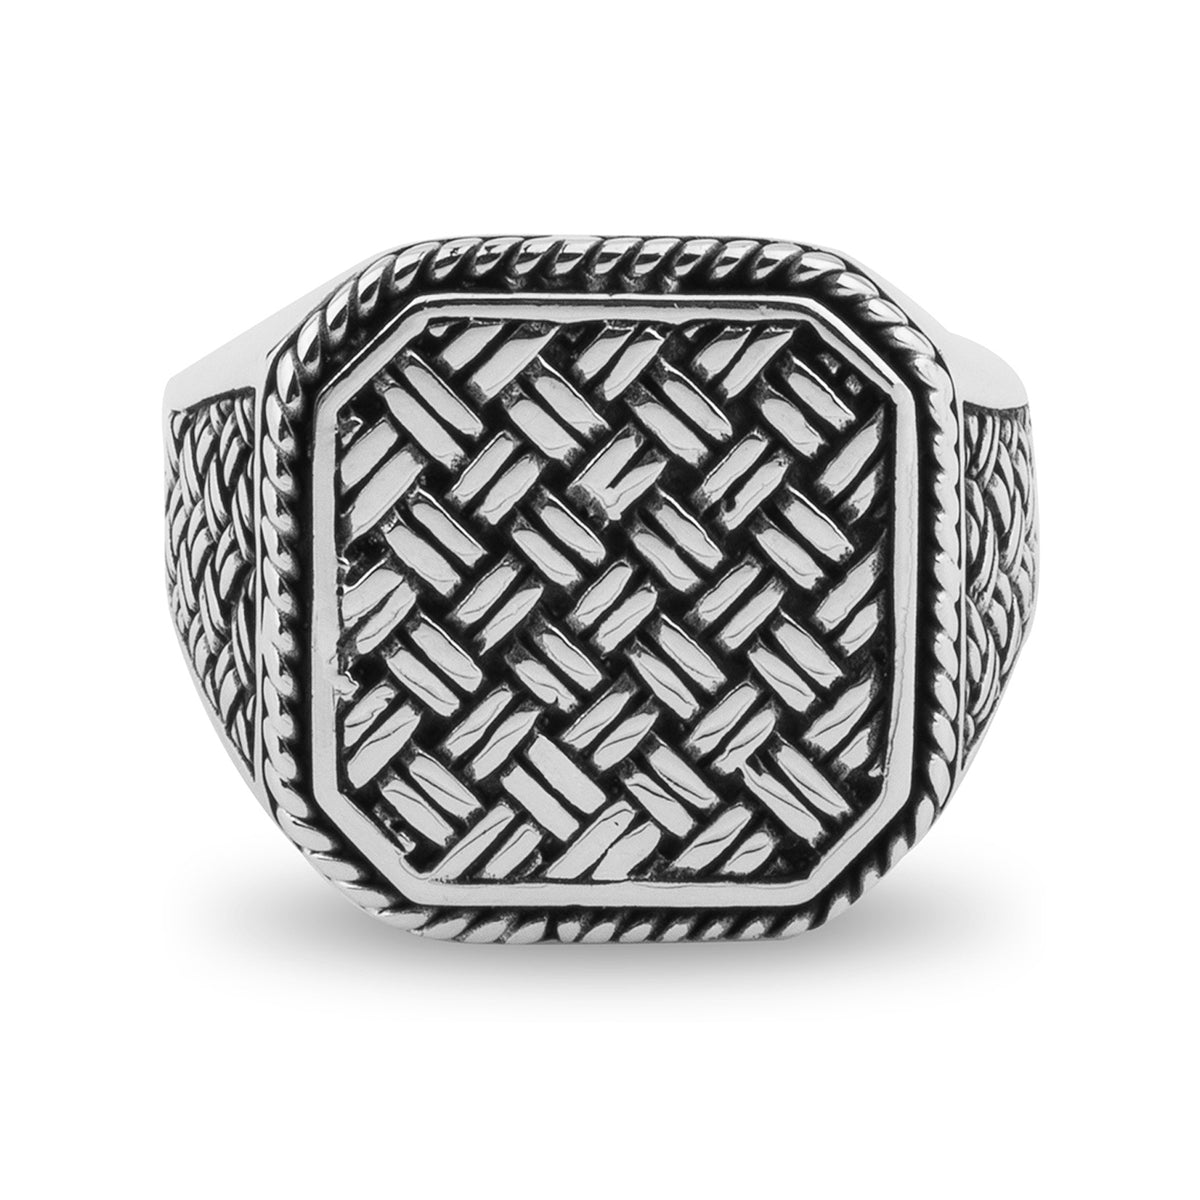 Woven/Mesh Design Large Square Sterling Silver Ring –